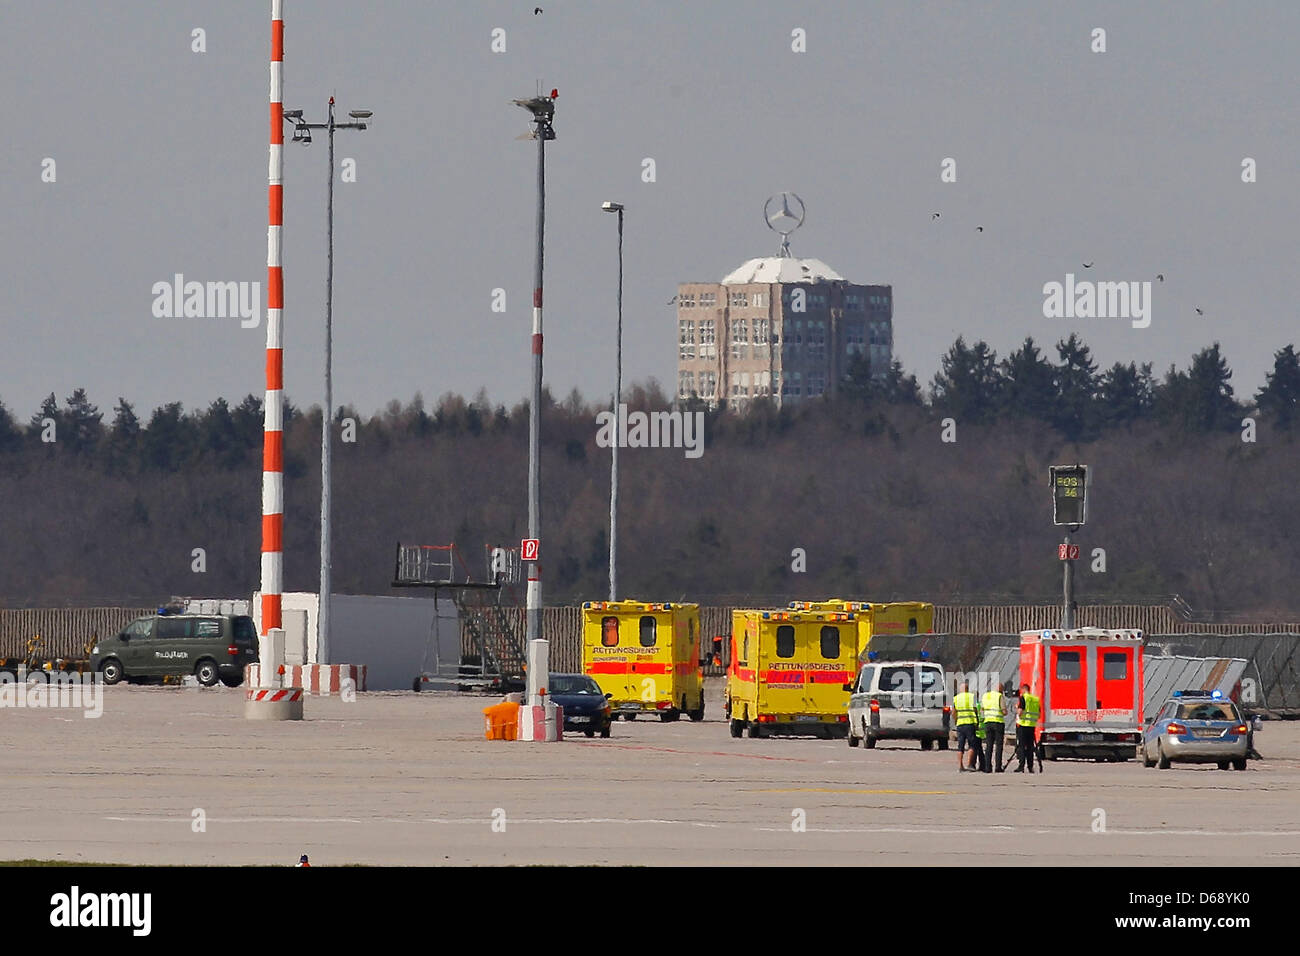 Yellow vehicles from the German Army's emergency medical service are parked on the runway at the airport in Stuttgart, Germany, 15 April 2013. Critically injured victims of the civil war in Syria were transported on a German Army Airbus out of Amman, Jordan, where they were being treated, for further treatment in Germany on the aircraft. Photo: THOMAS NIEDERMUELLER Stock Photo